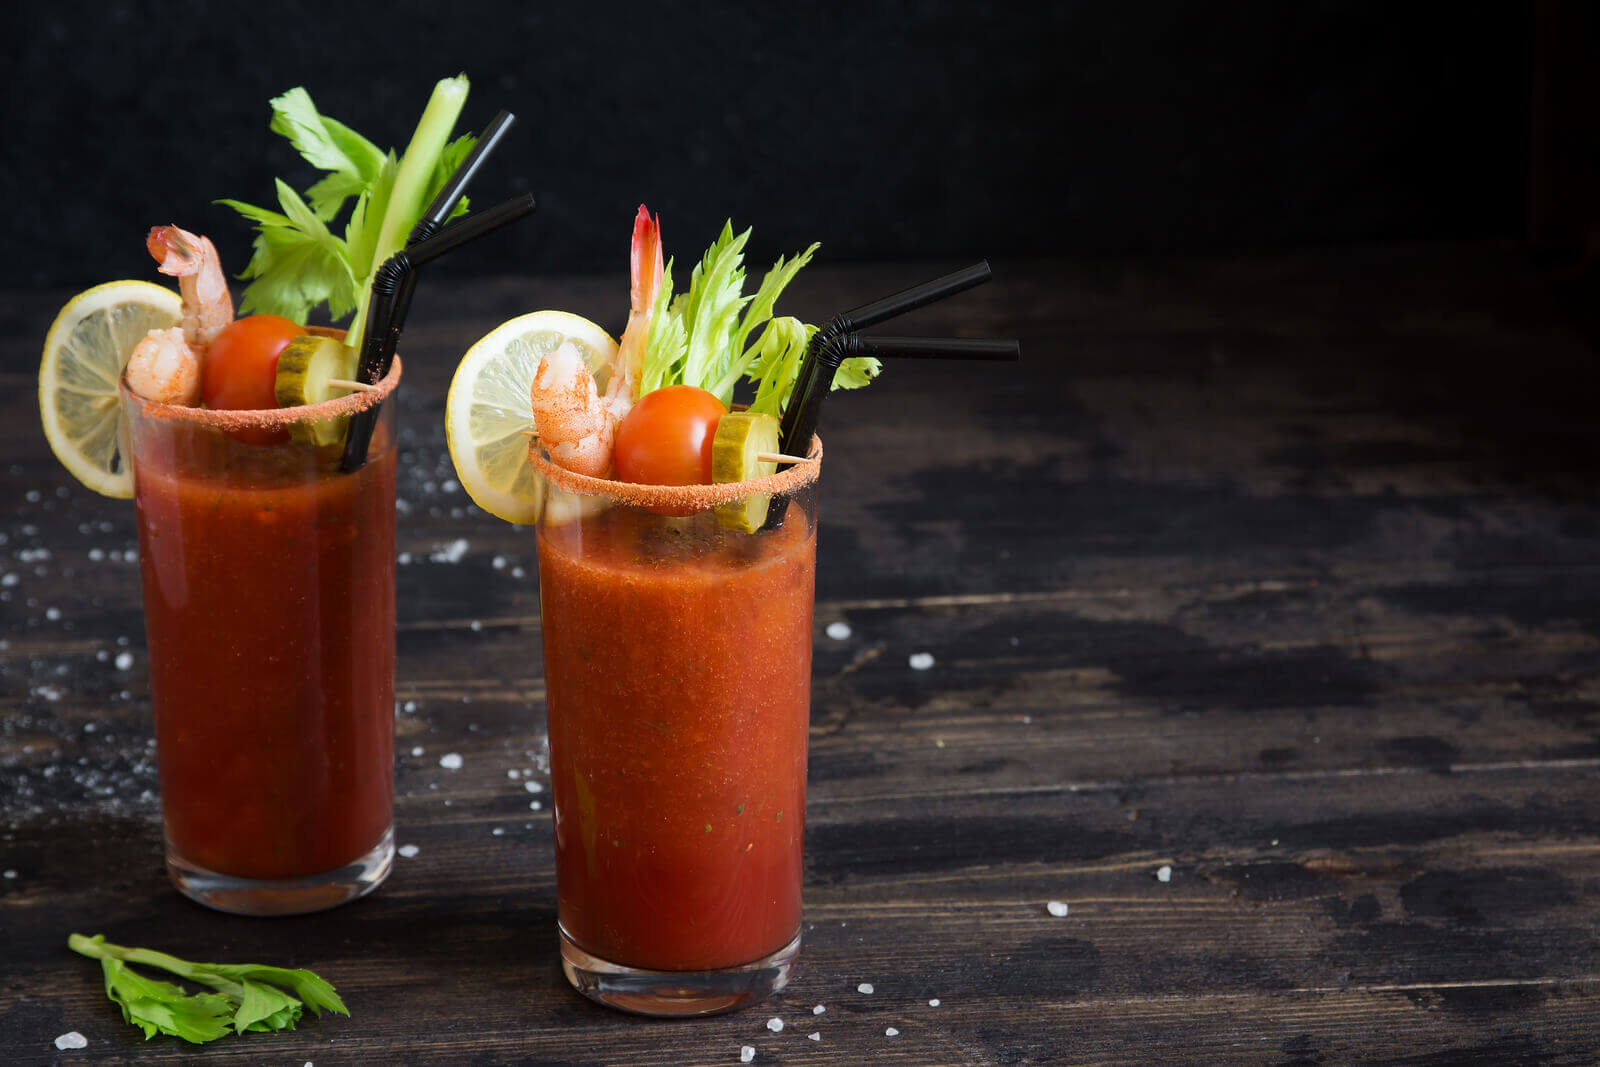 Happy New Year! A Bloody Mary Brunch recipe for 2019